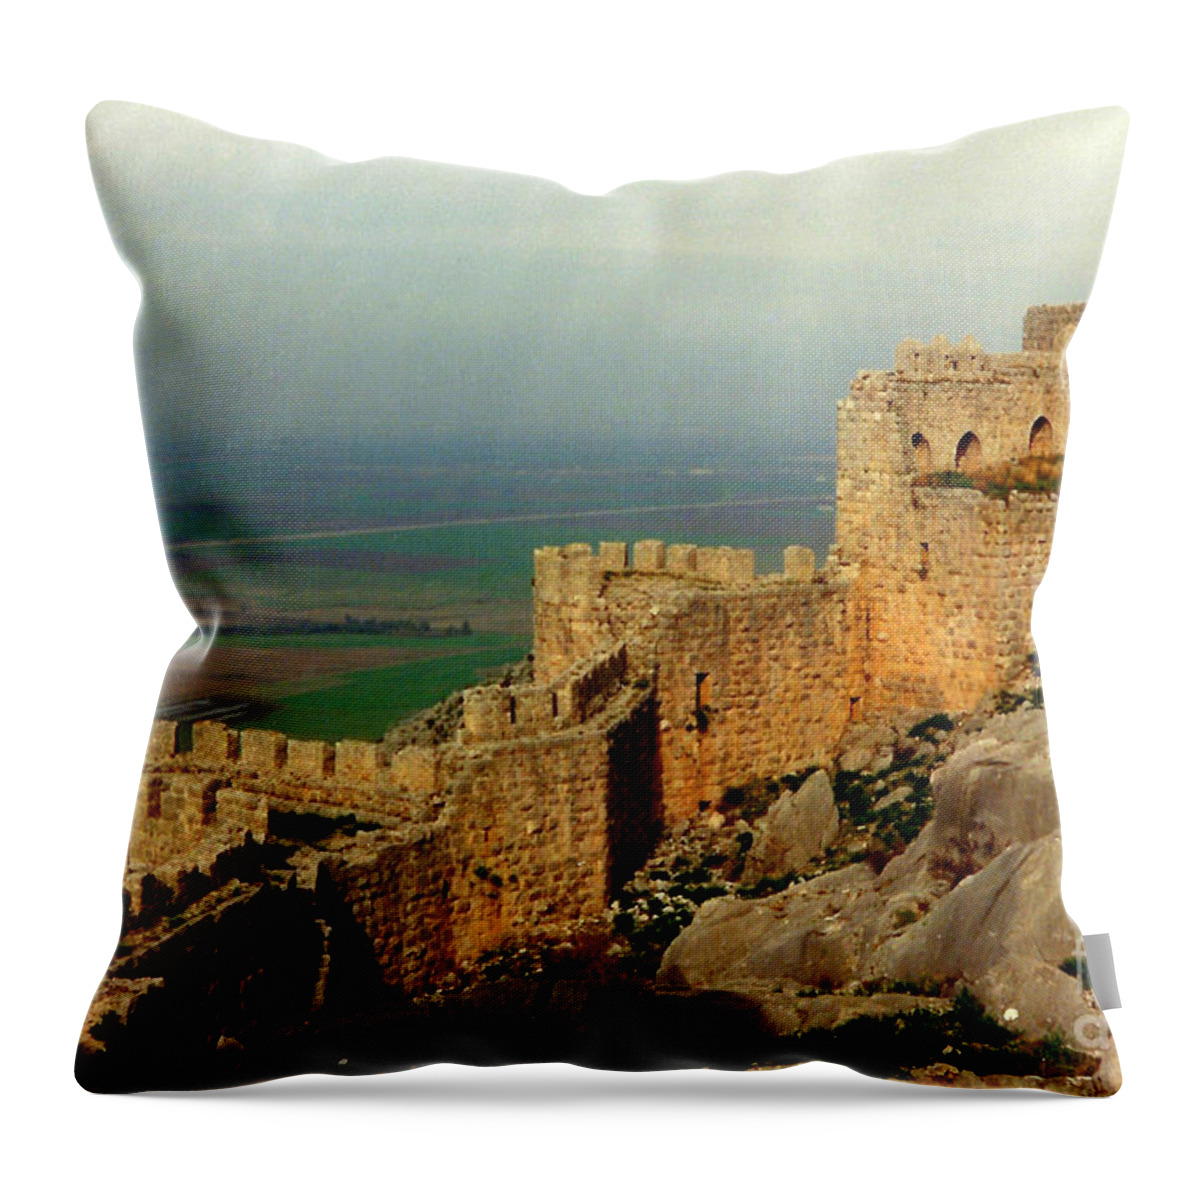  Throw Pillow featuring the photograph Snake Castle by Lou Ann Bagnall